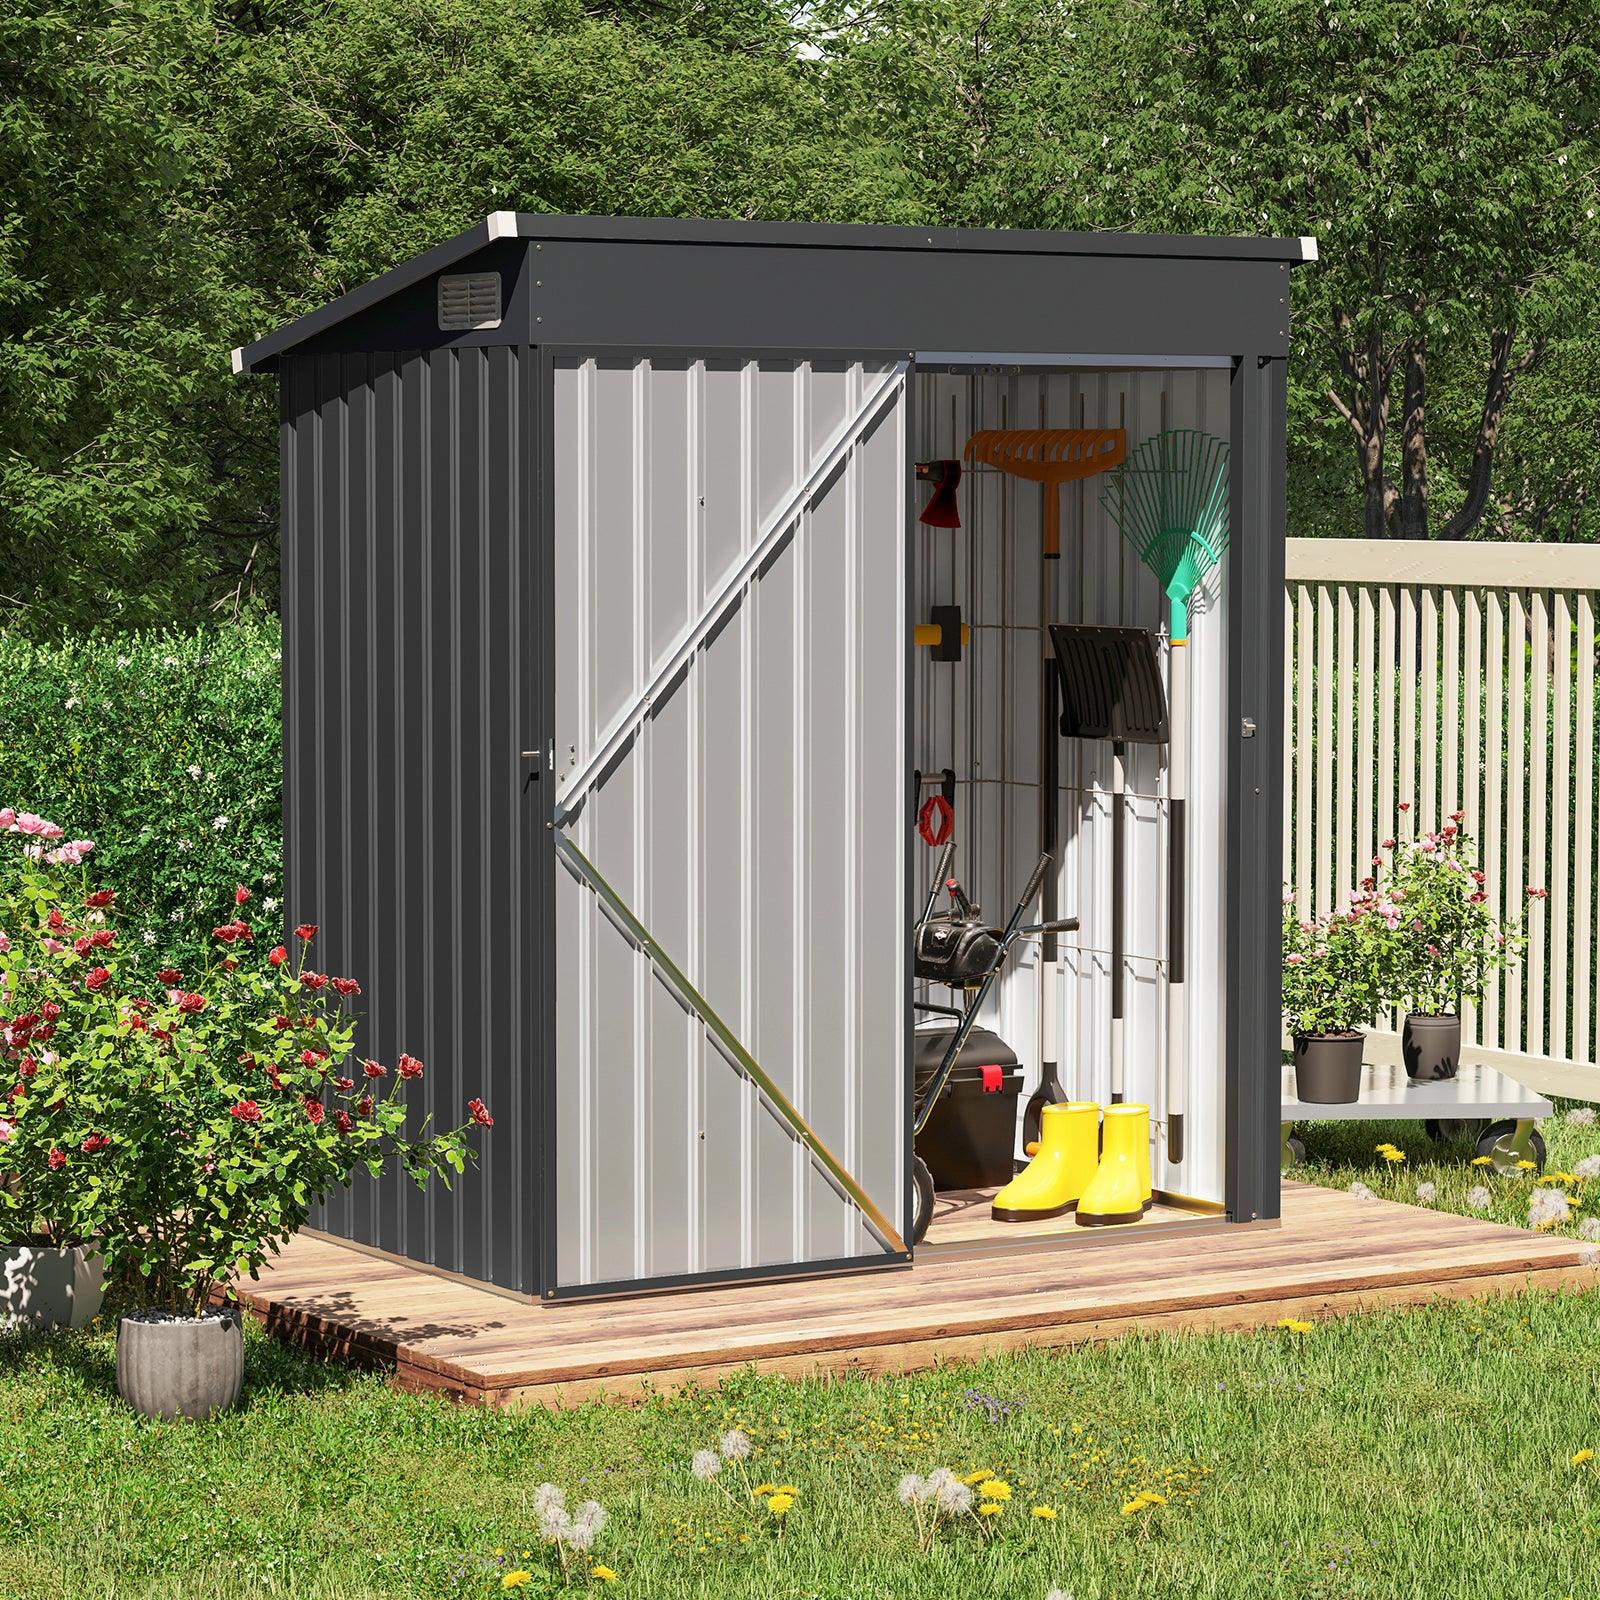 5'x 3' Outdoor Storage Shed, Metal Garden Tool Shed for Backyard, Patio, Lawn, Black